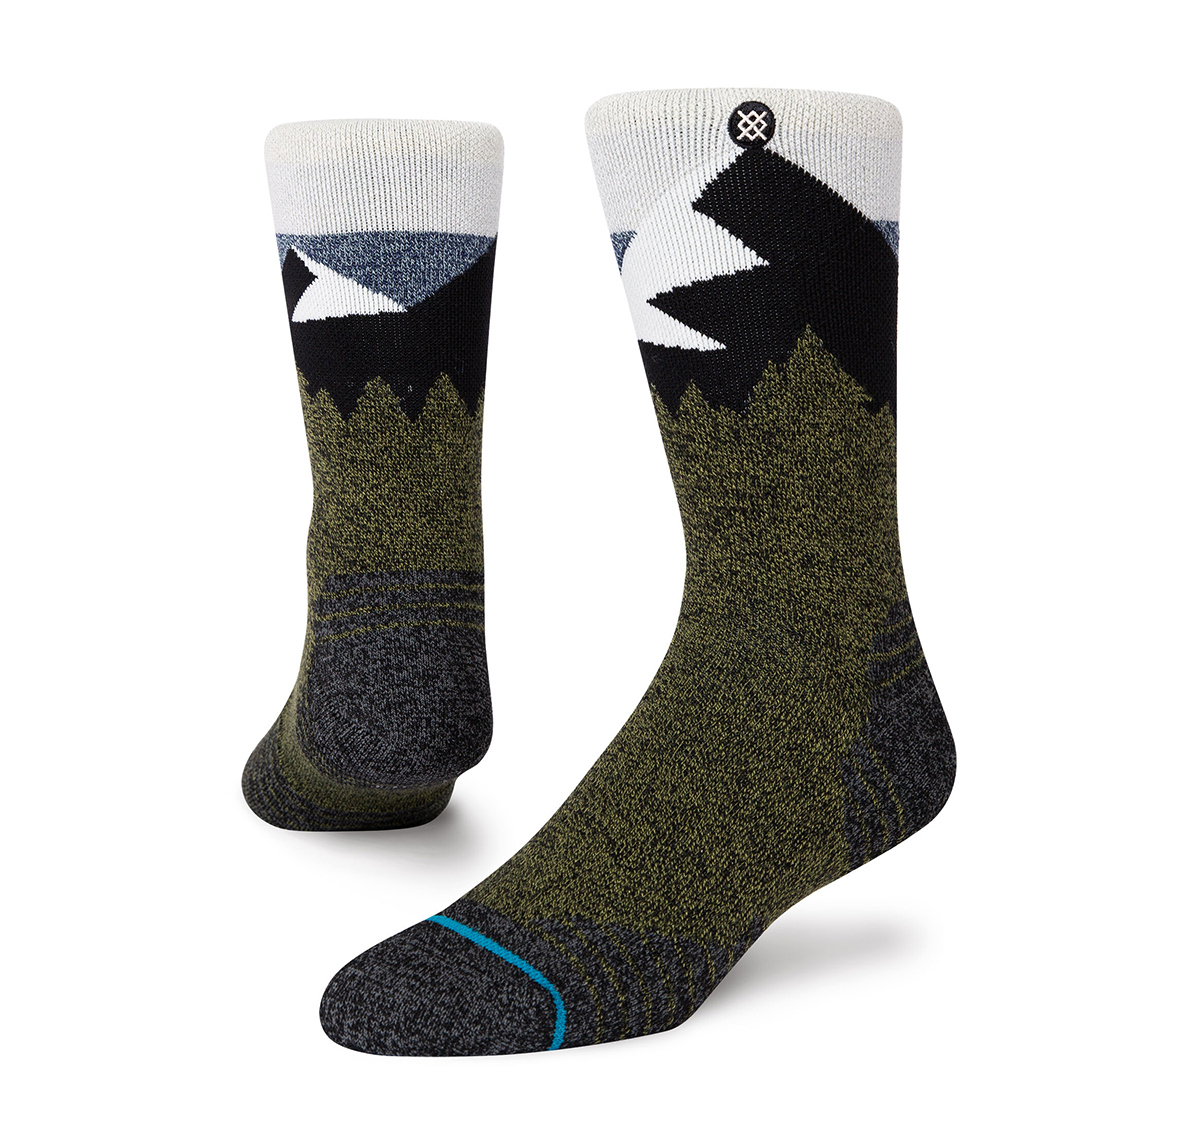 Stance Divide - Hike - InfiKnit - Green pair